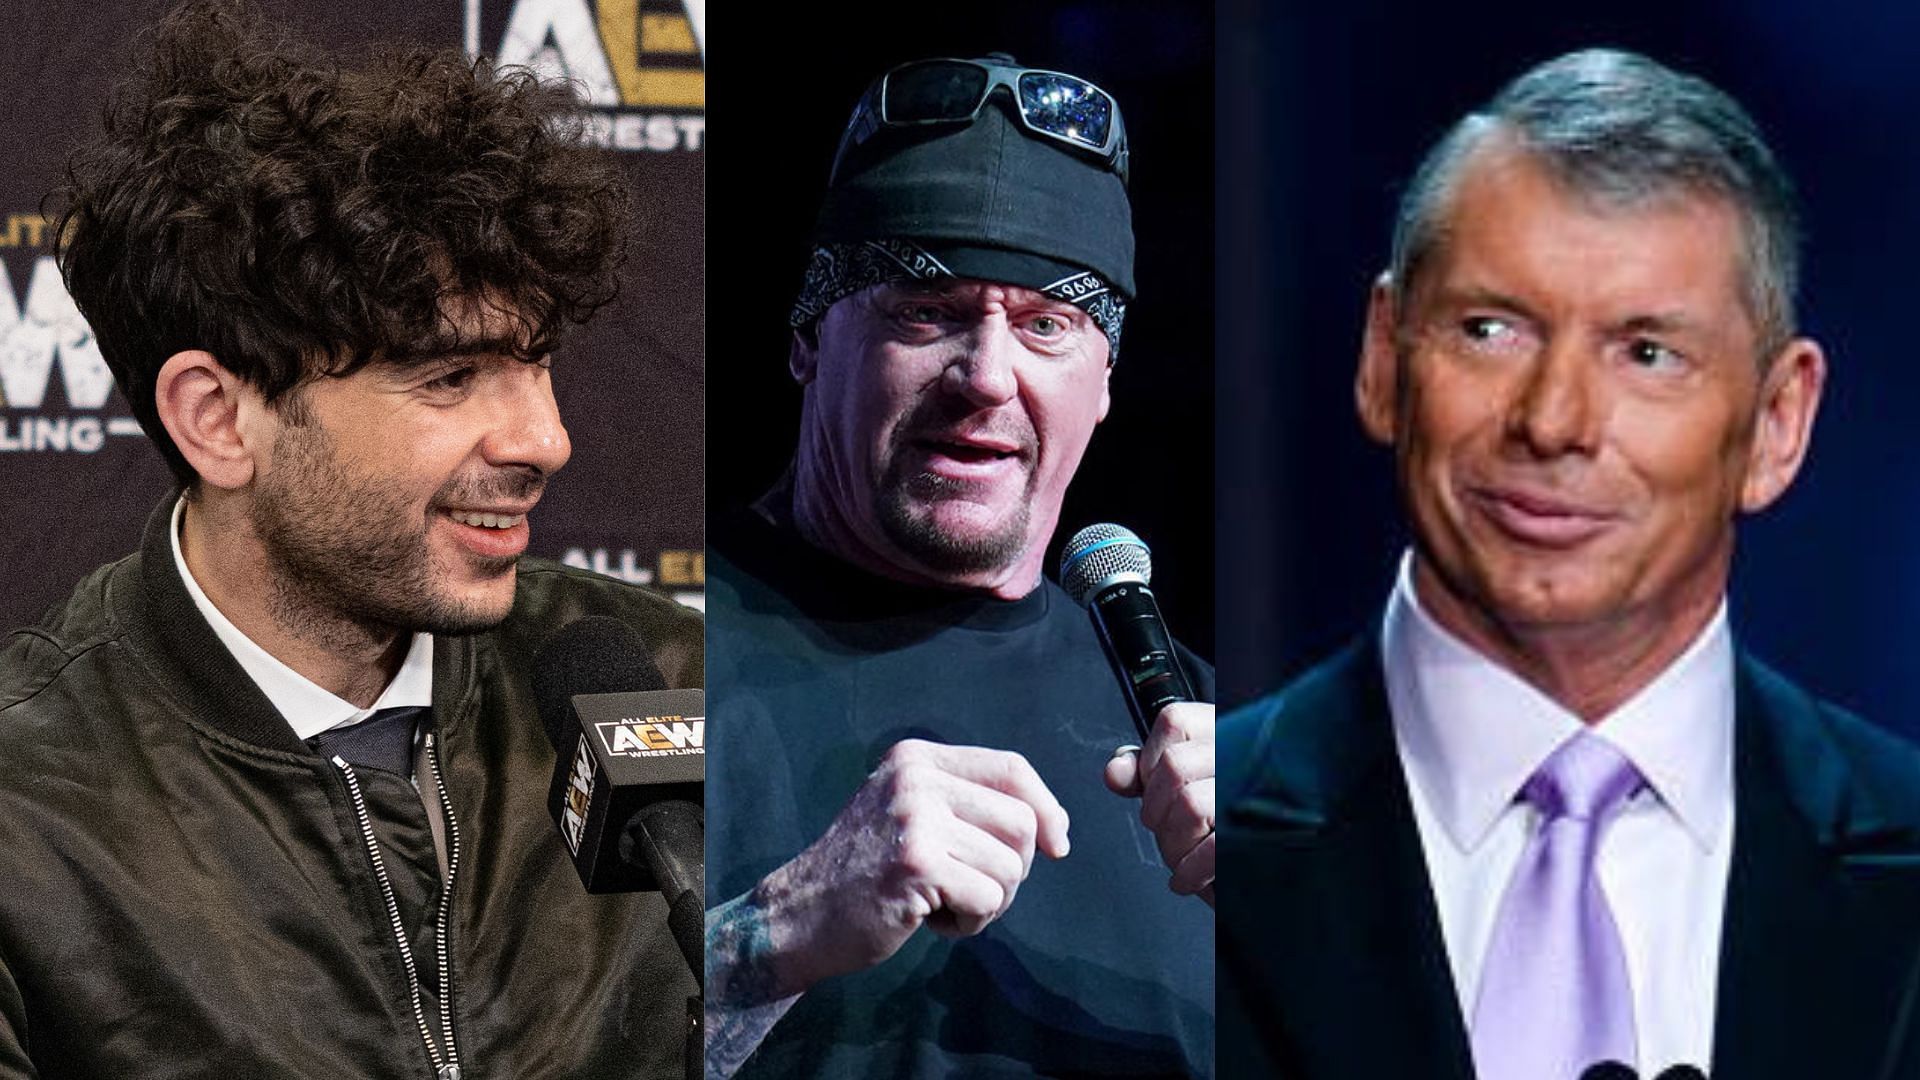 Which AEW star does Tony Khan have a bond with like Vince McMahon and The Undertaker?